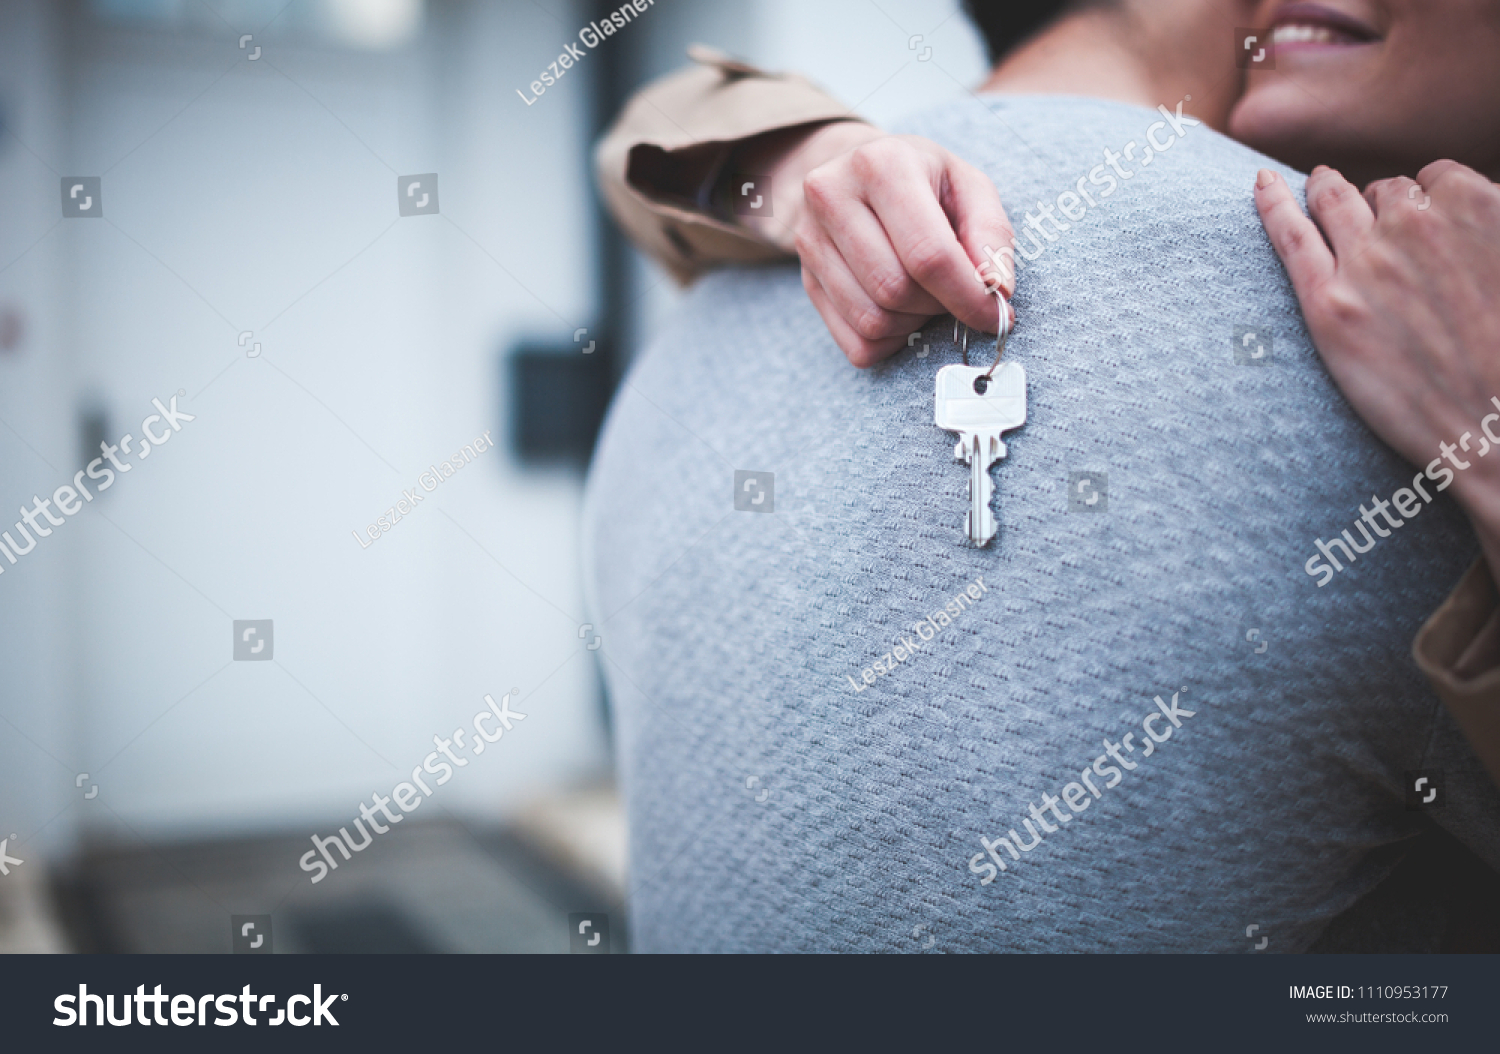 Young woman holding keys hugging husband in front of their new home after buying real estate #1110953177